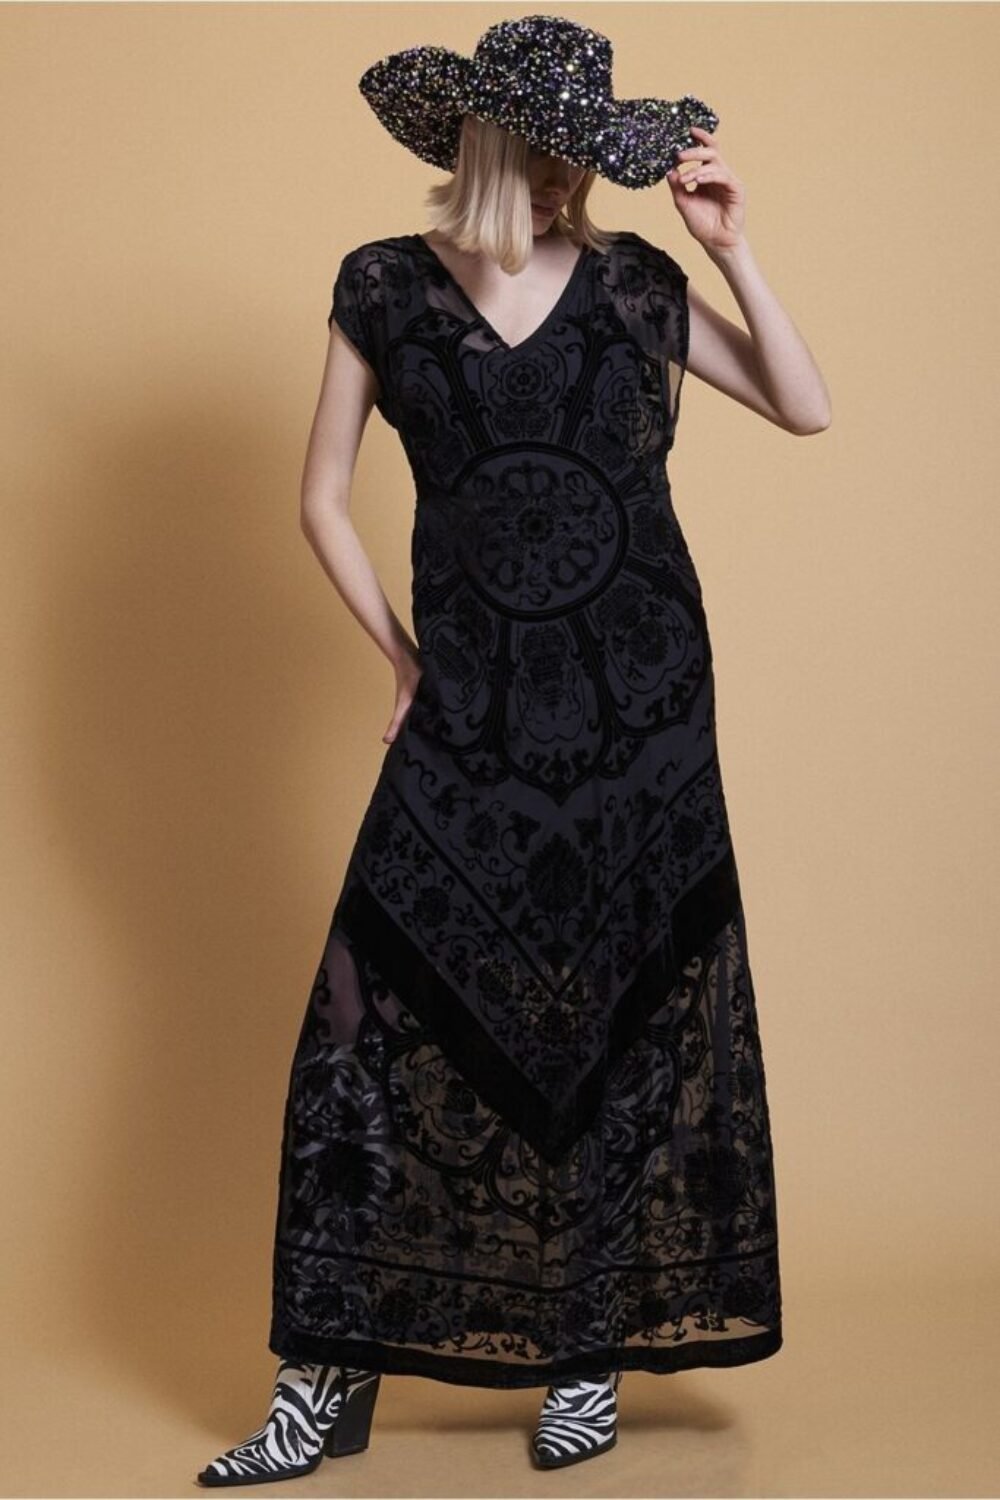 Shop Lux Black Silk Devore Dress and women's luxury and designer clothes at www.lux-apparel.co.uk